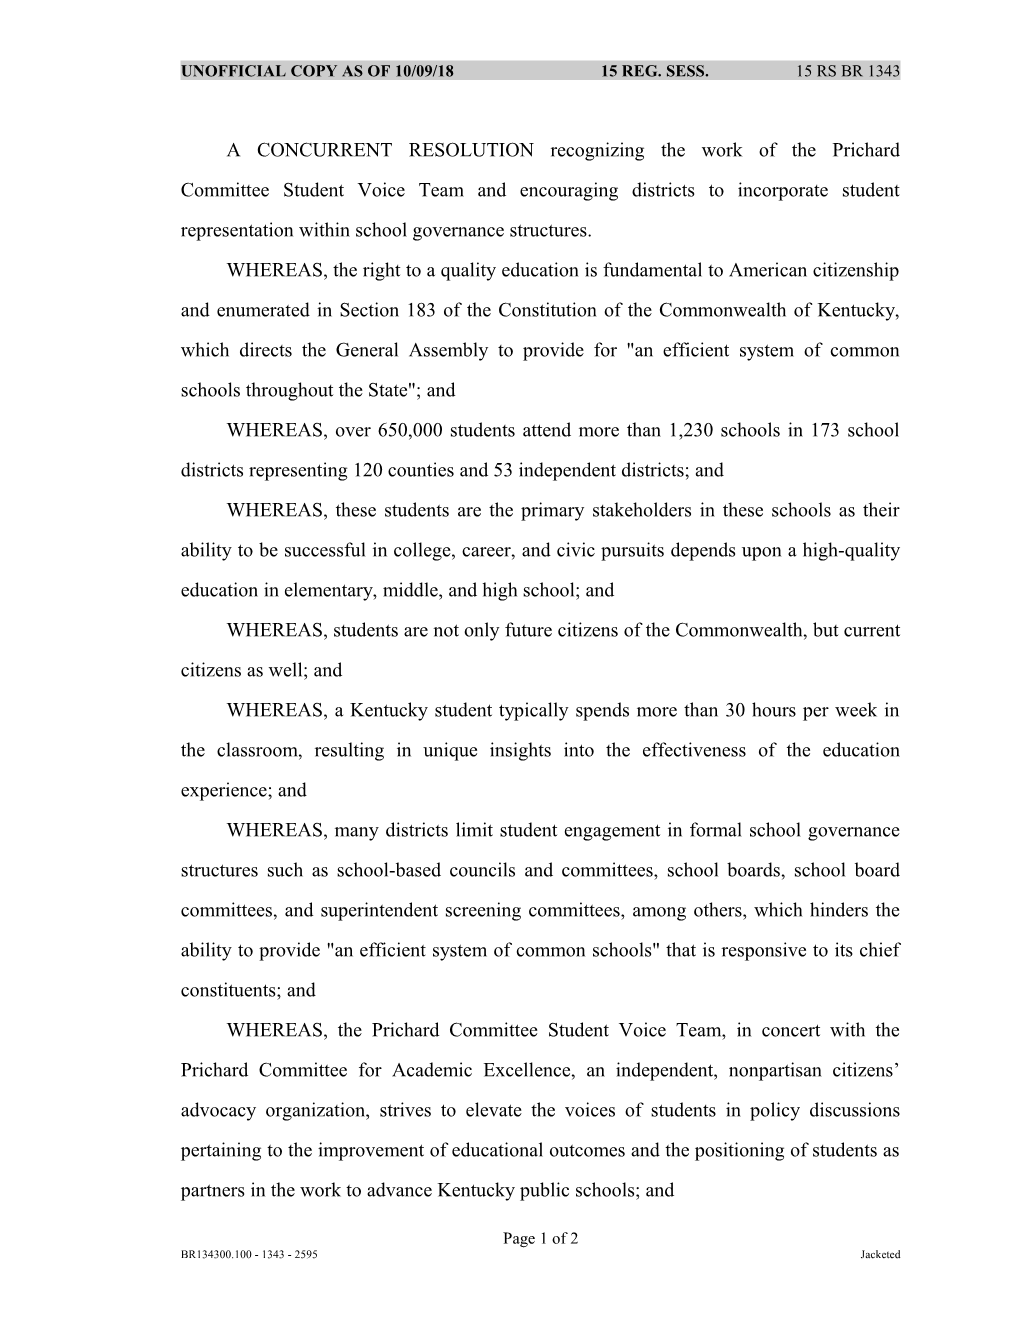 A CONCURRENT RESOLUTION Recognizing the Work of the Prichard Committee Student Voice Team